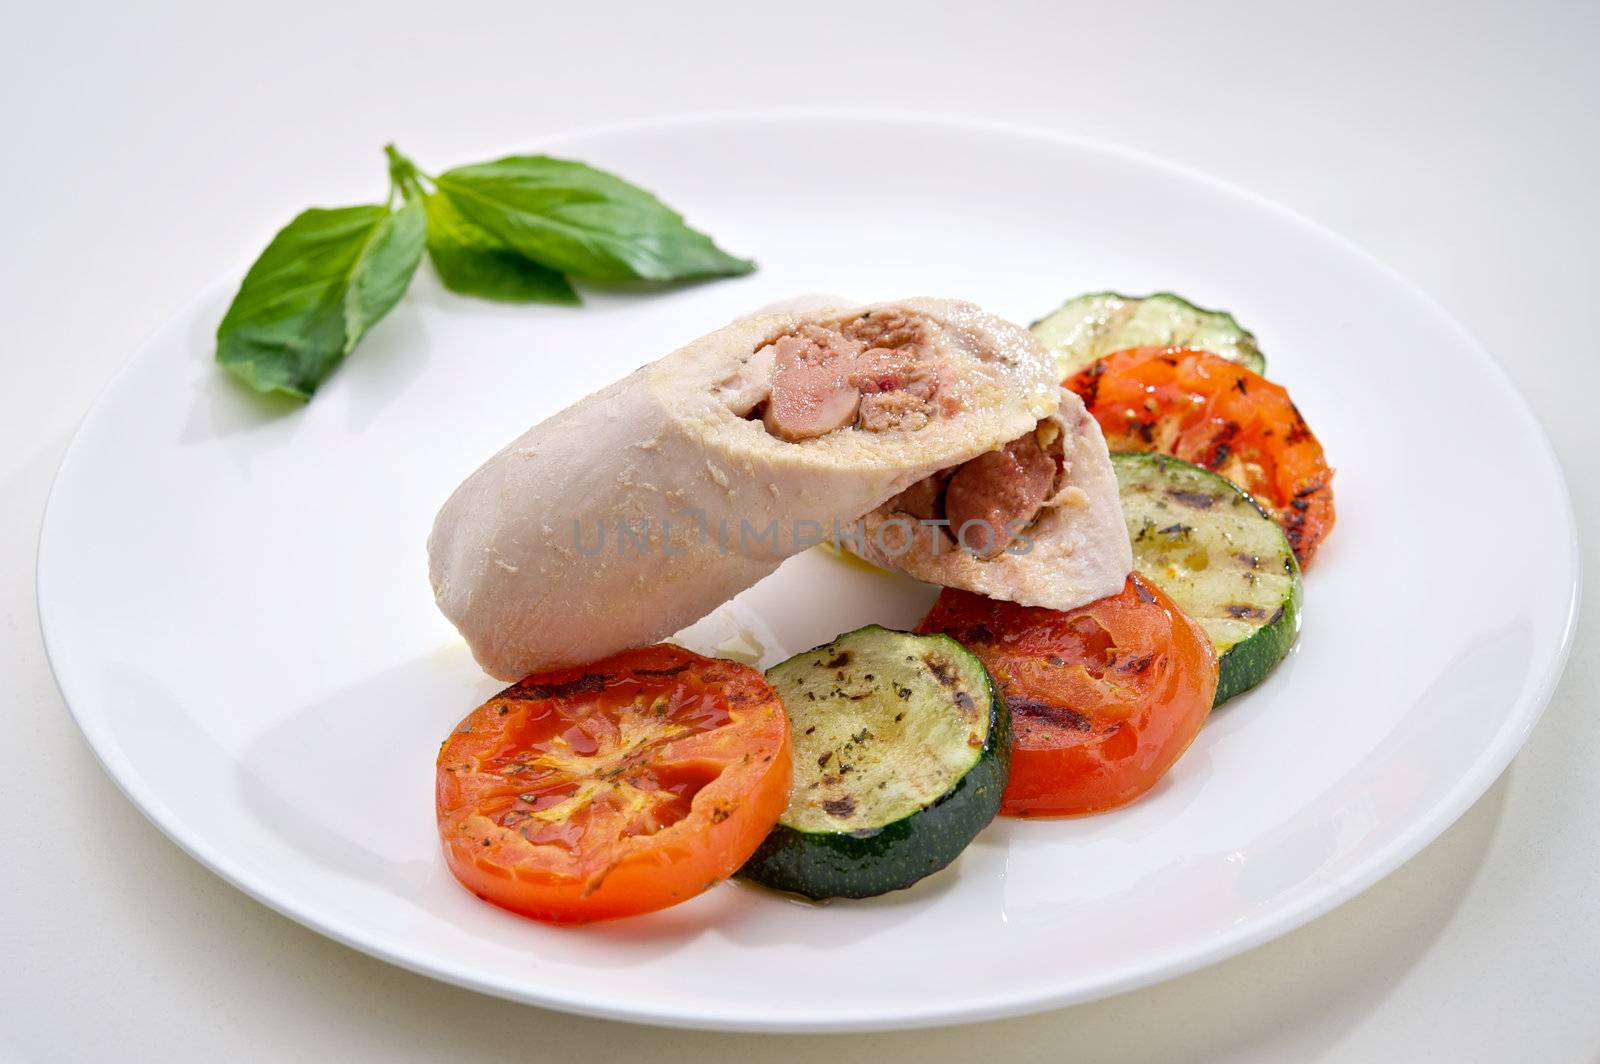 Steamed chicken cutlets served with baked vegetables on round white plate